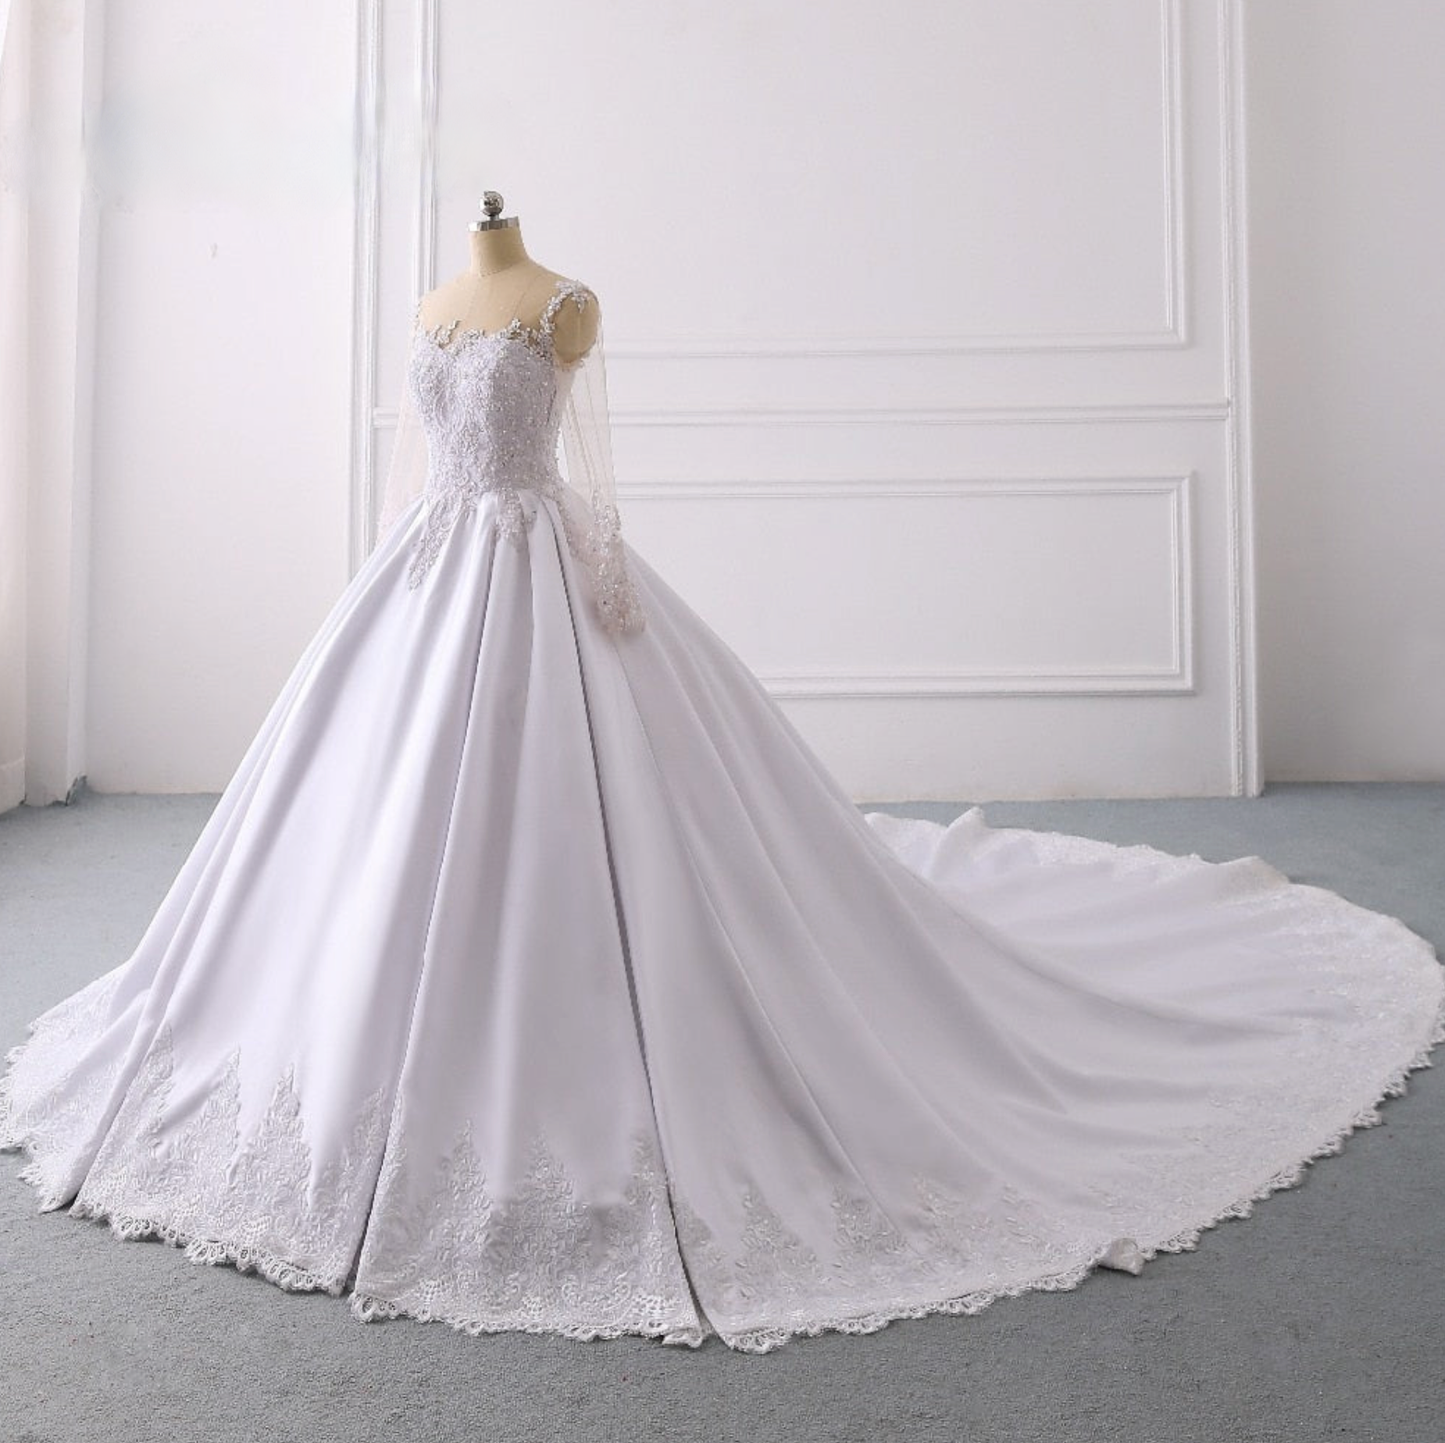 White Satin A Line Lace Illusion Sleeve Royal Train Wedding Bridal Ball Gown